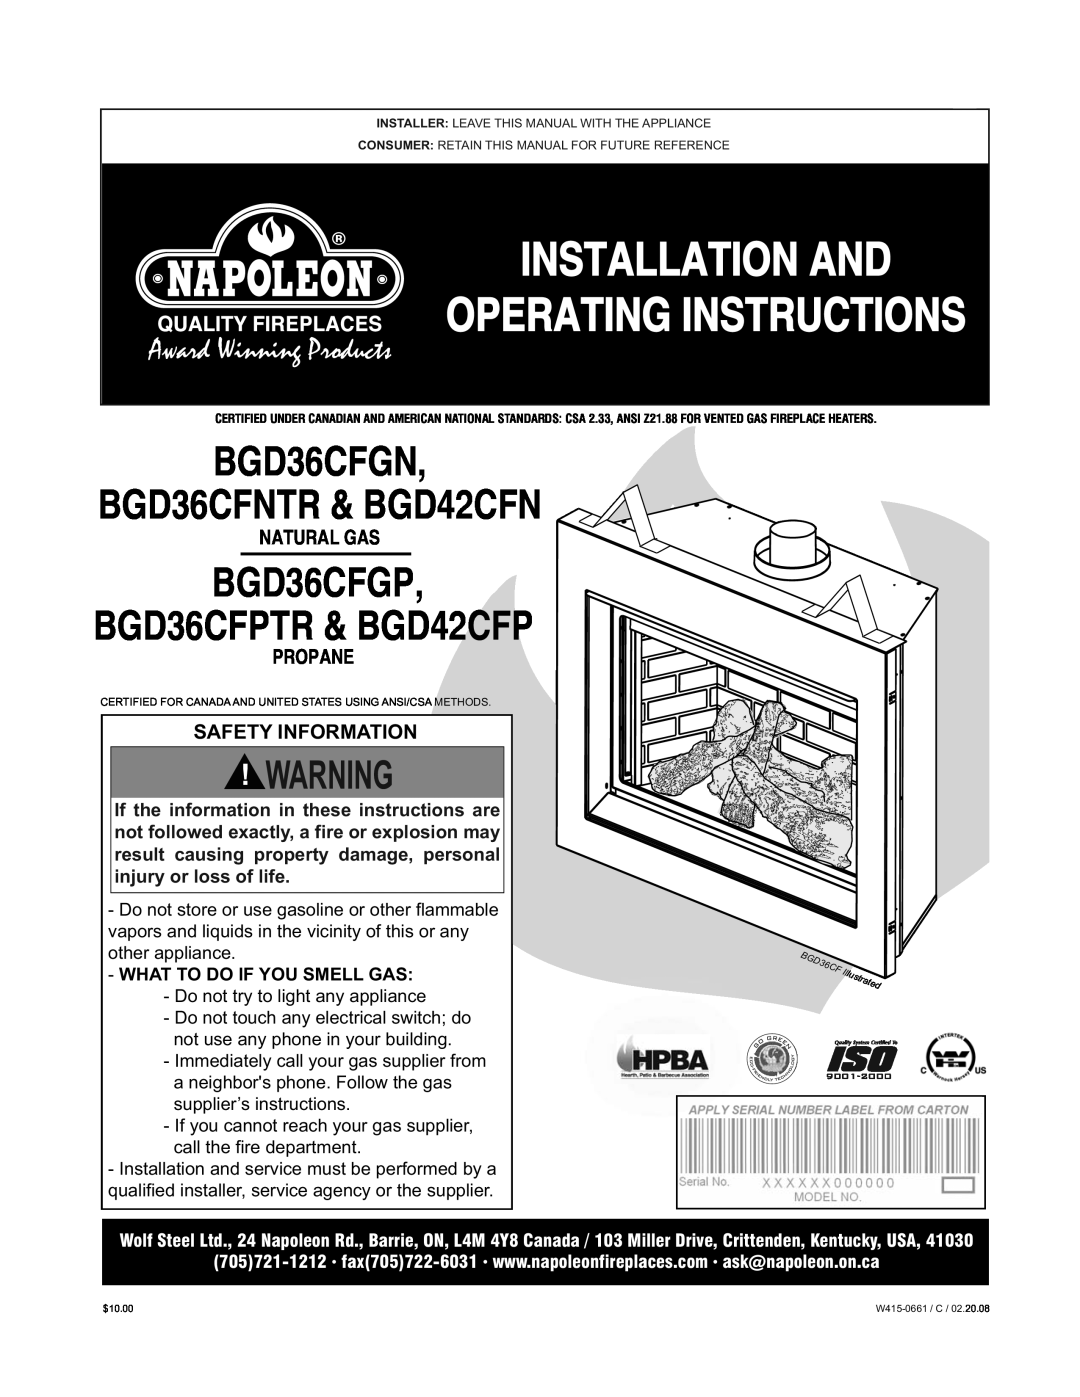 Napoleon Fireplaces manual Installation And Operating Instructions, BGD36CFGN BGD36CFNTR & BGD42CFN, Natural Gas 